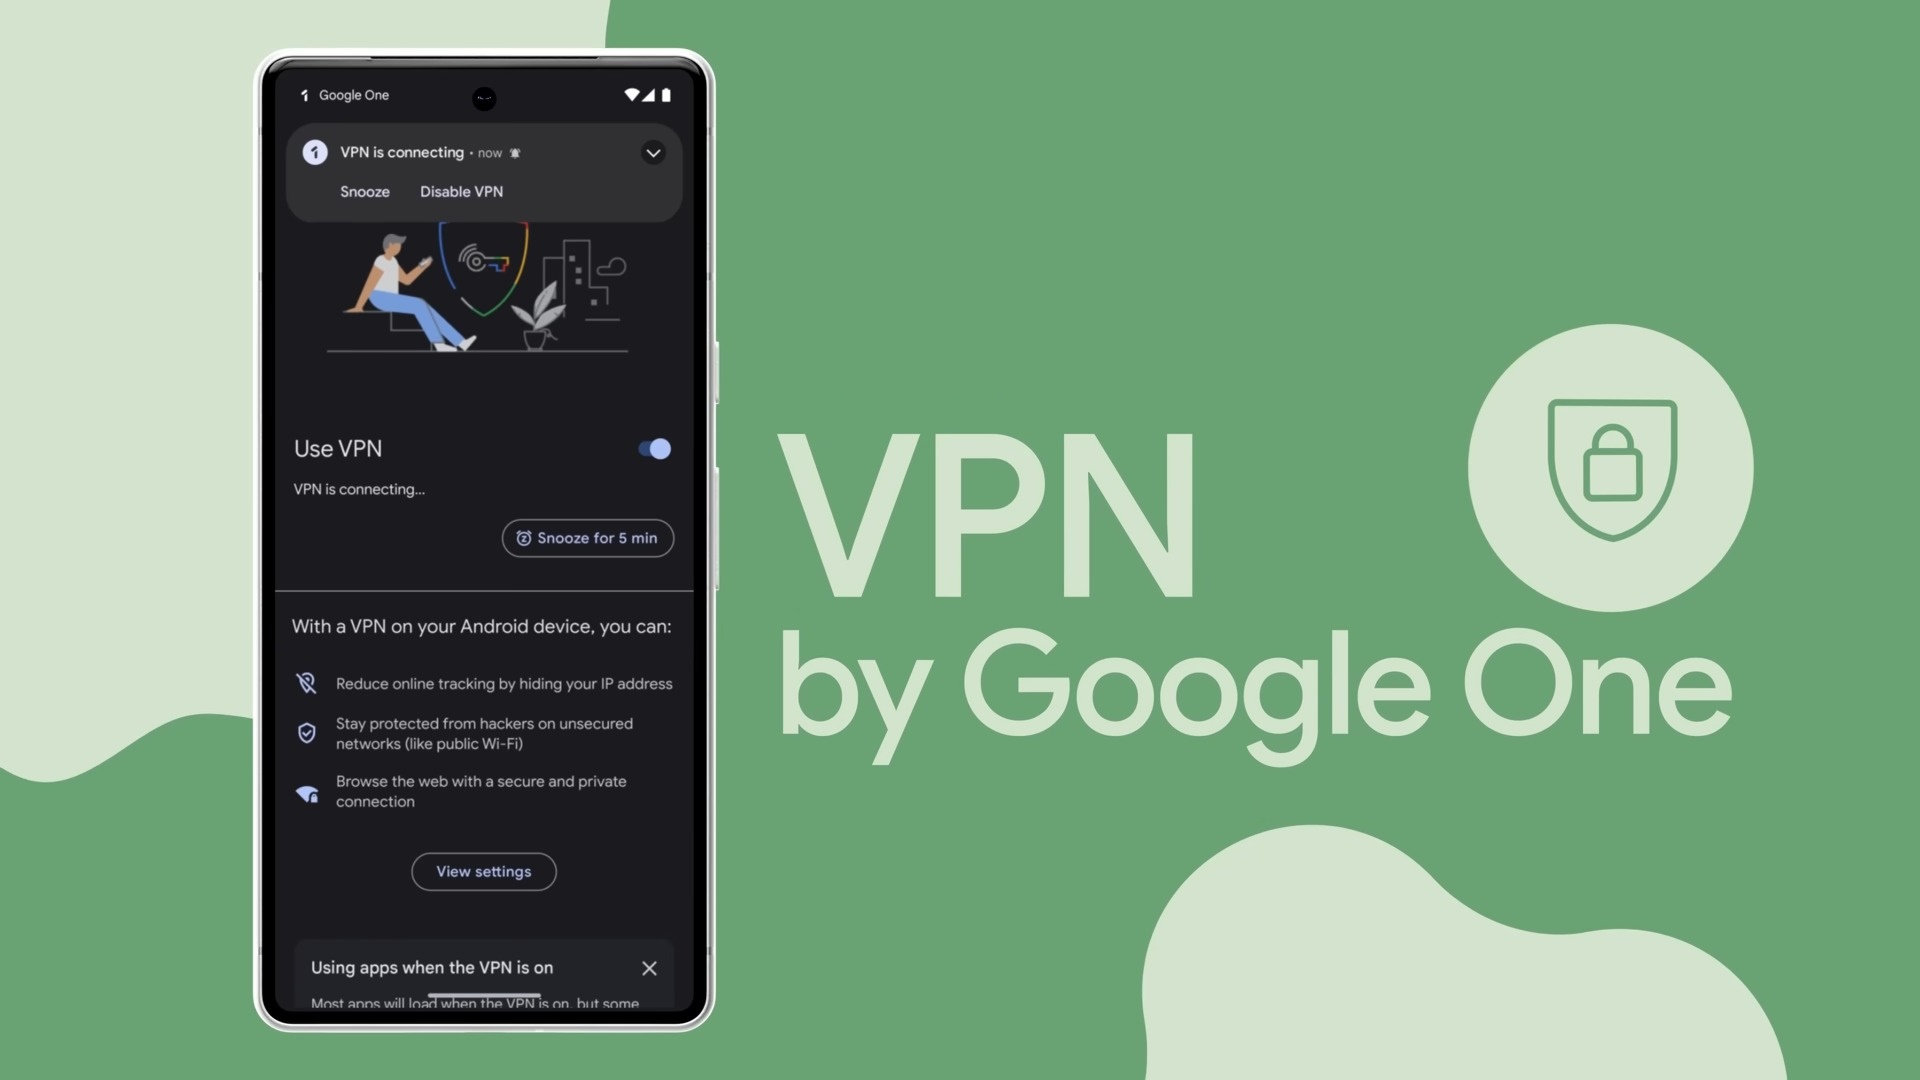 Google Pixel feature abandoned VPN by Google One